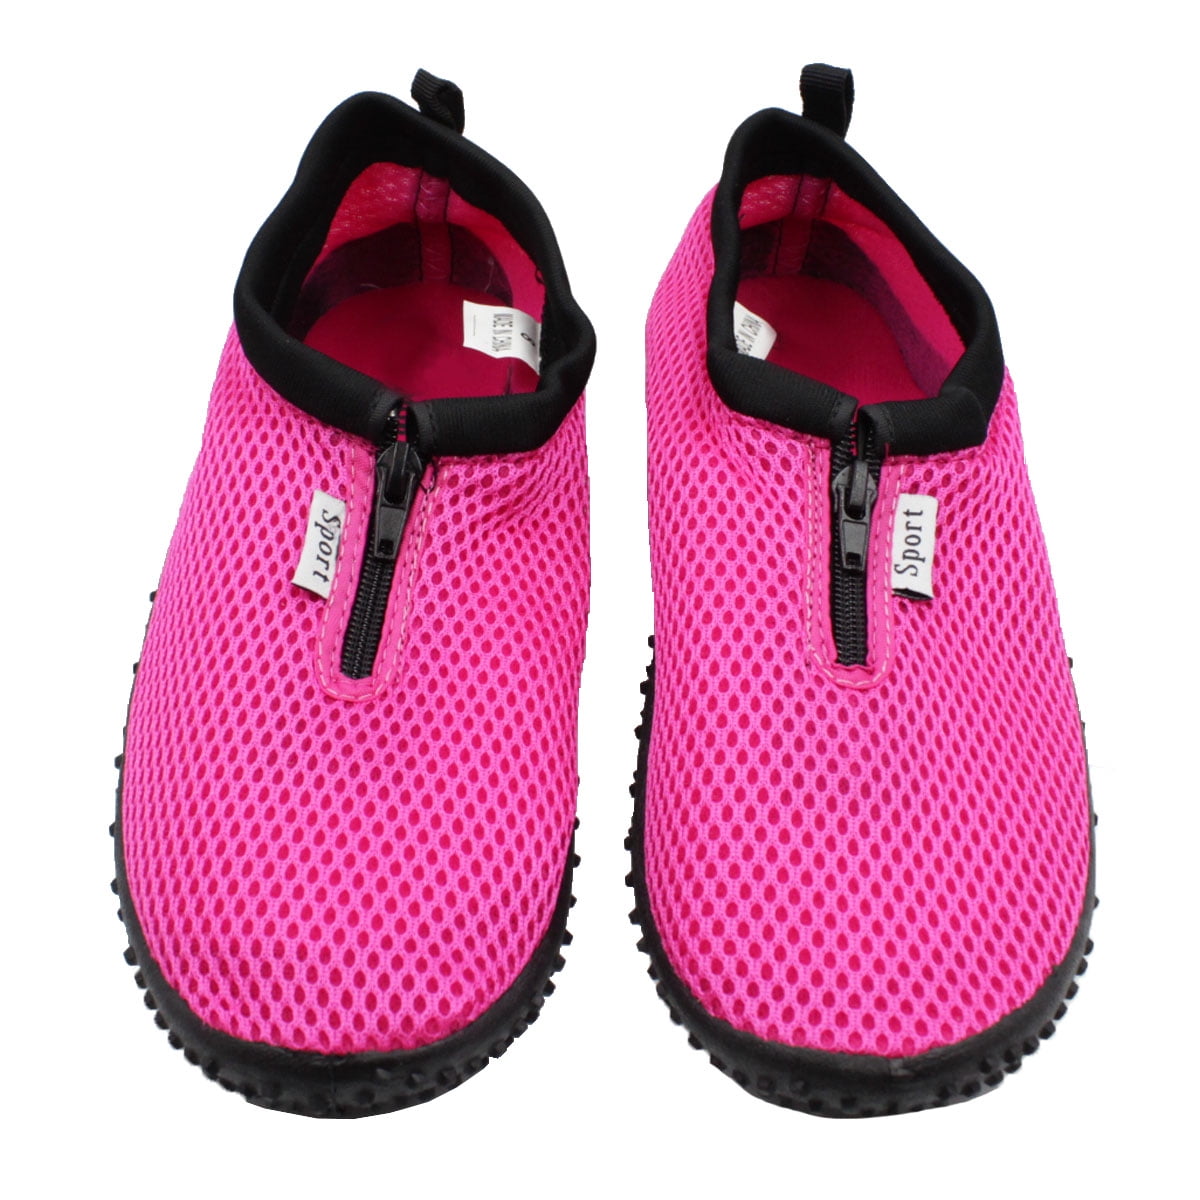 womens water shoes with zipper